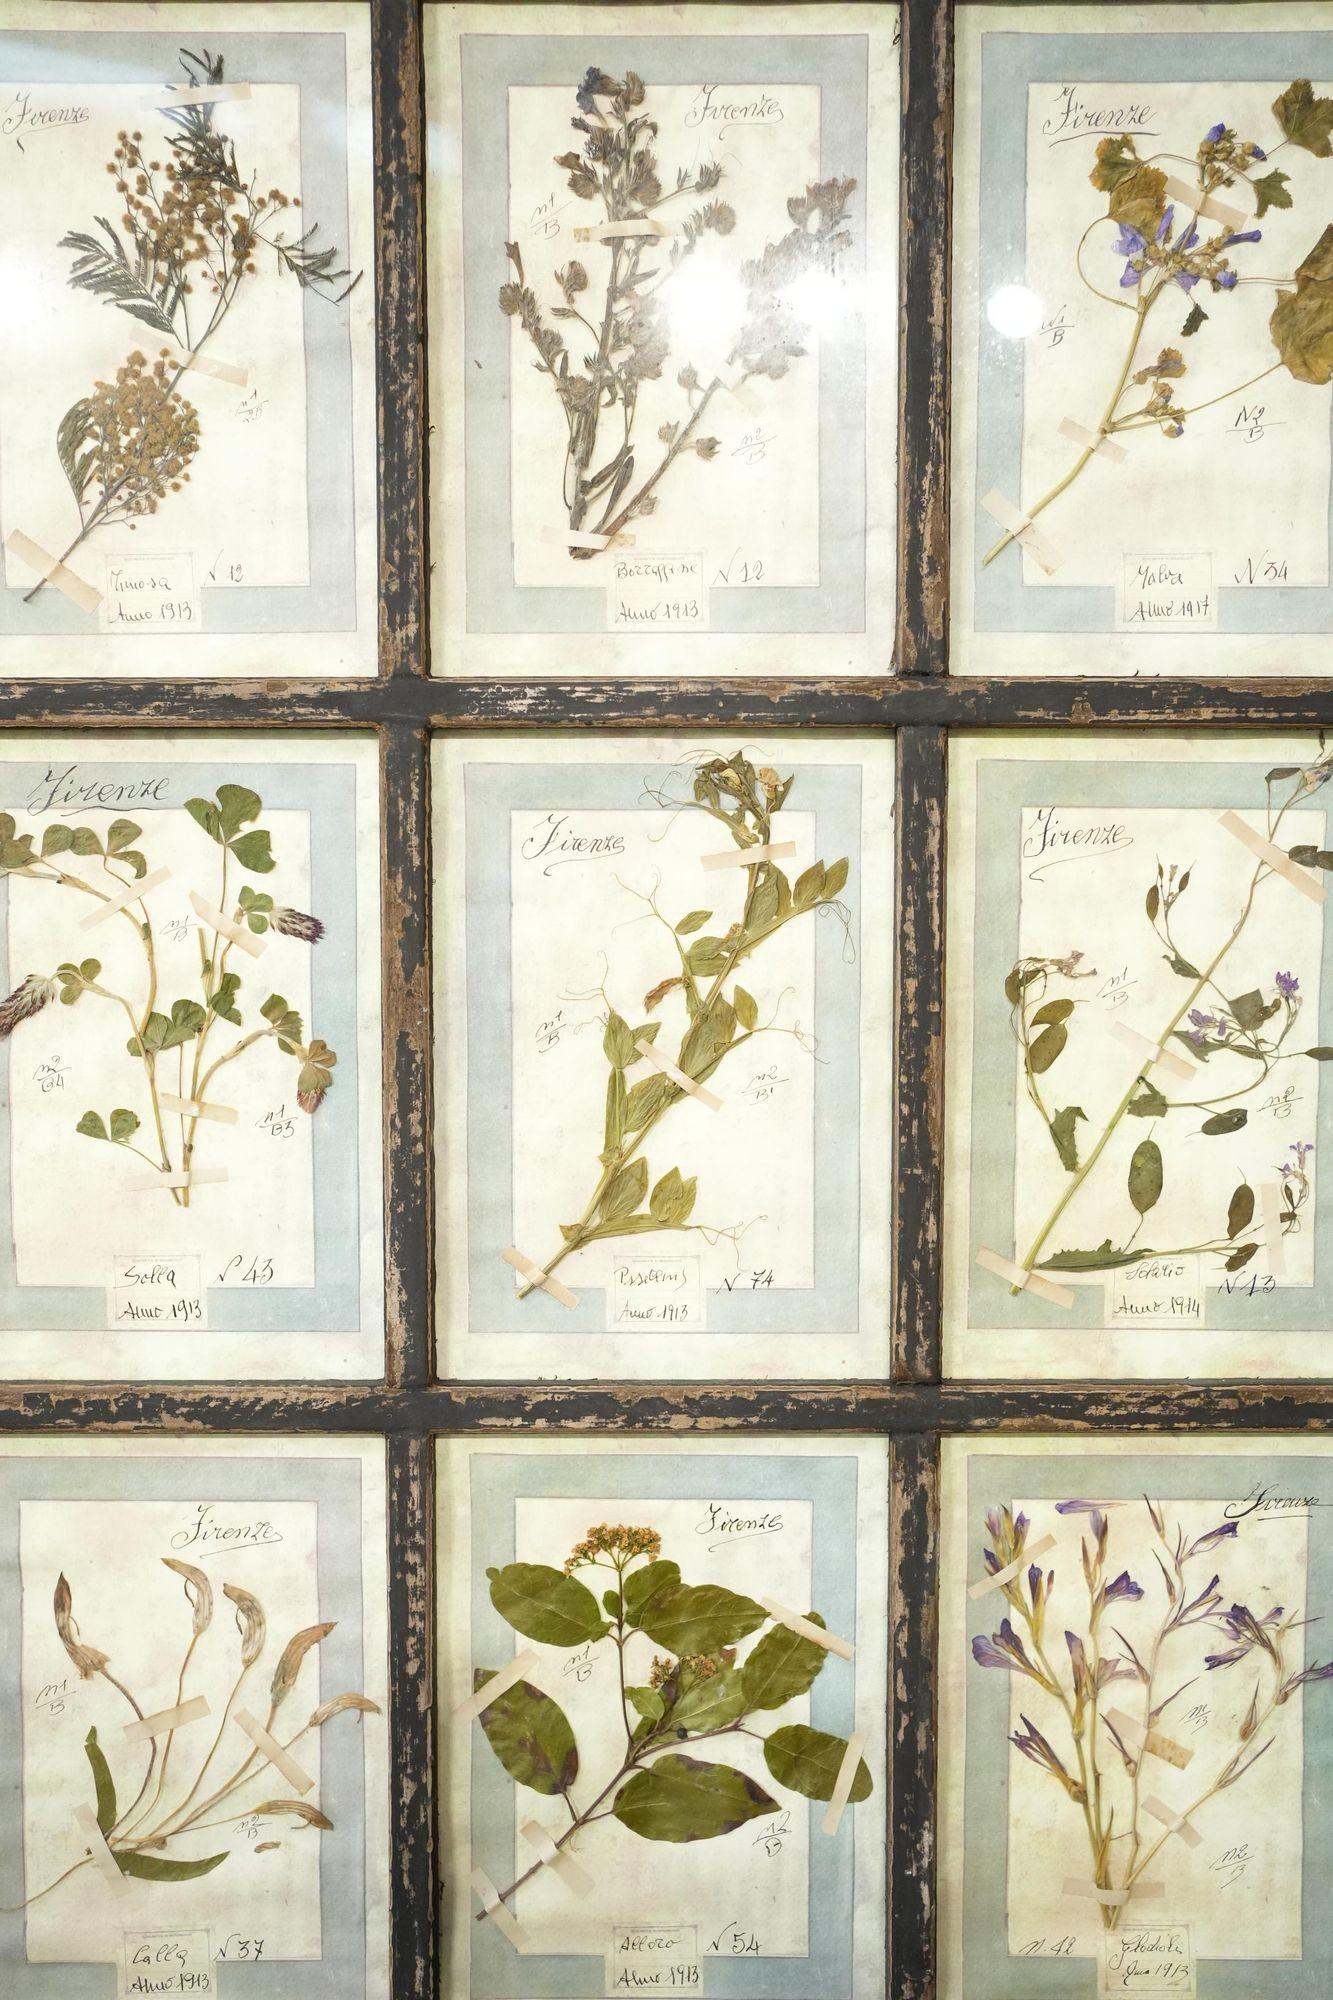 This is a stunning framed collection of herbariums. The pressed flowers are well preserved and make this hugely decorative frame. The frame is recently made and has a great created patina that suits the style of the herbariums perfectly. Large size